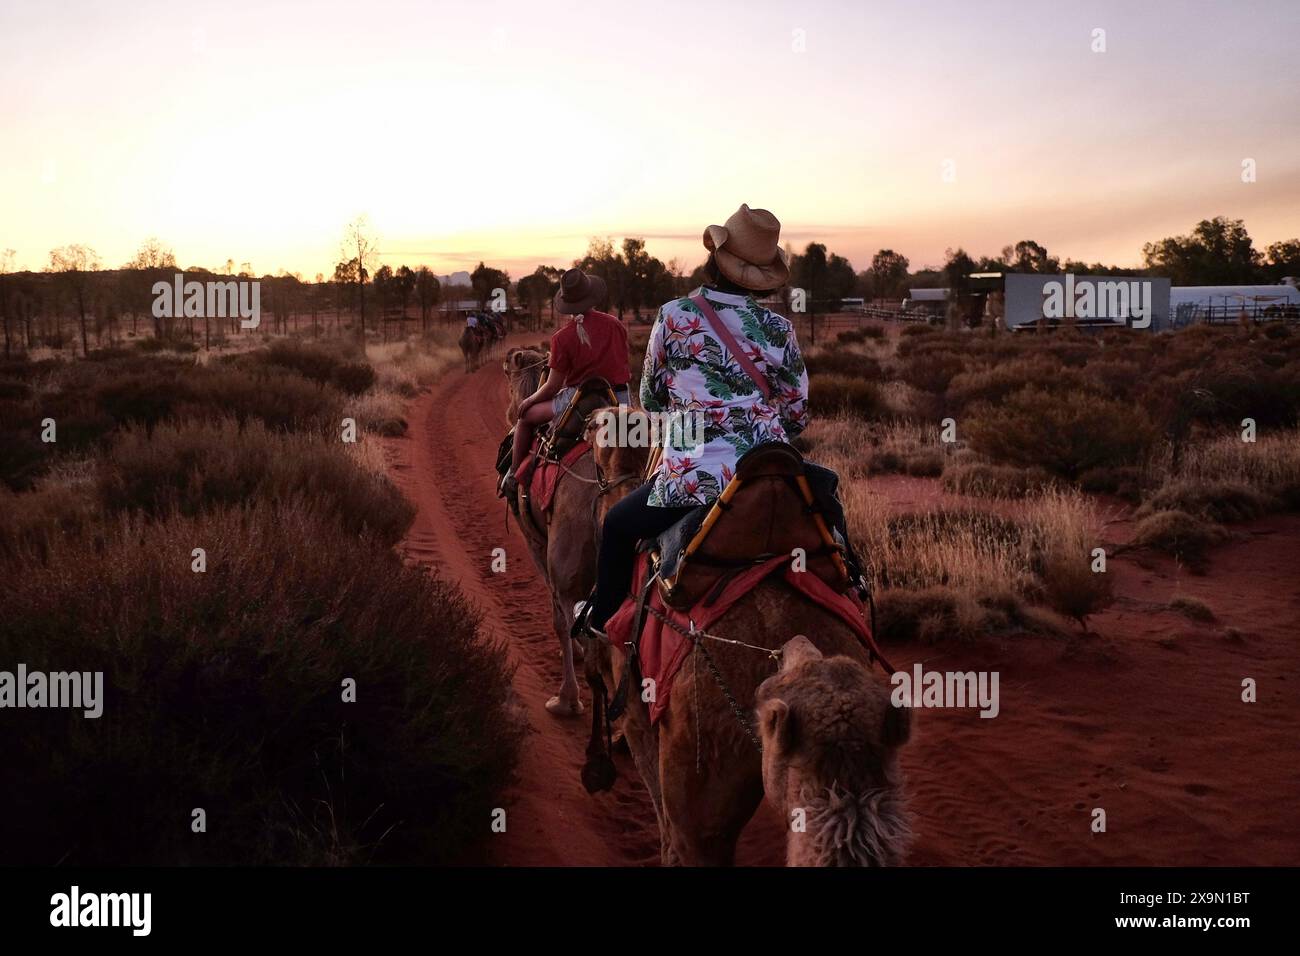 Woman riding a camel returning to the camel farm along a red sandy trail with desert shrubs, grass and outback sheds at dusk in Central Australia Stock Photo